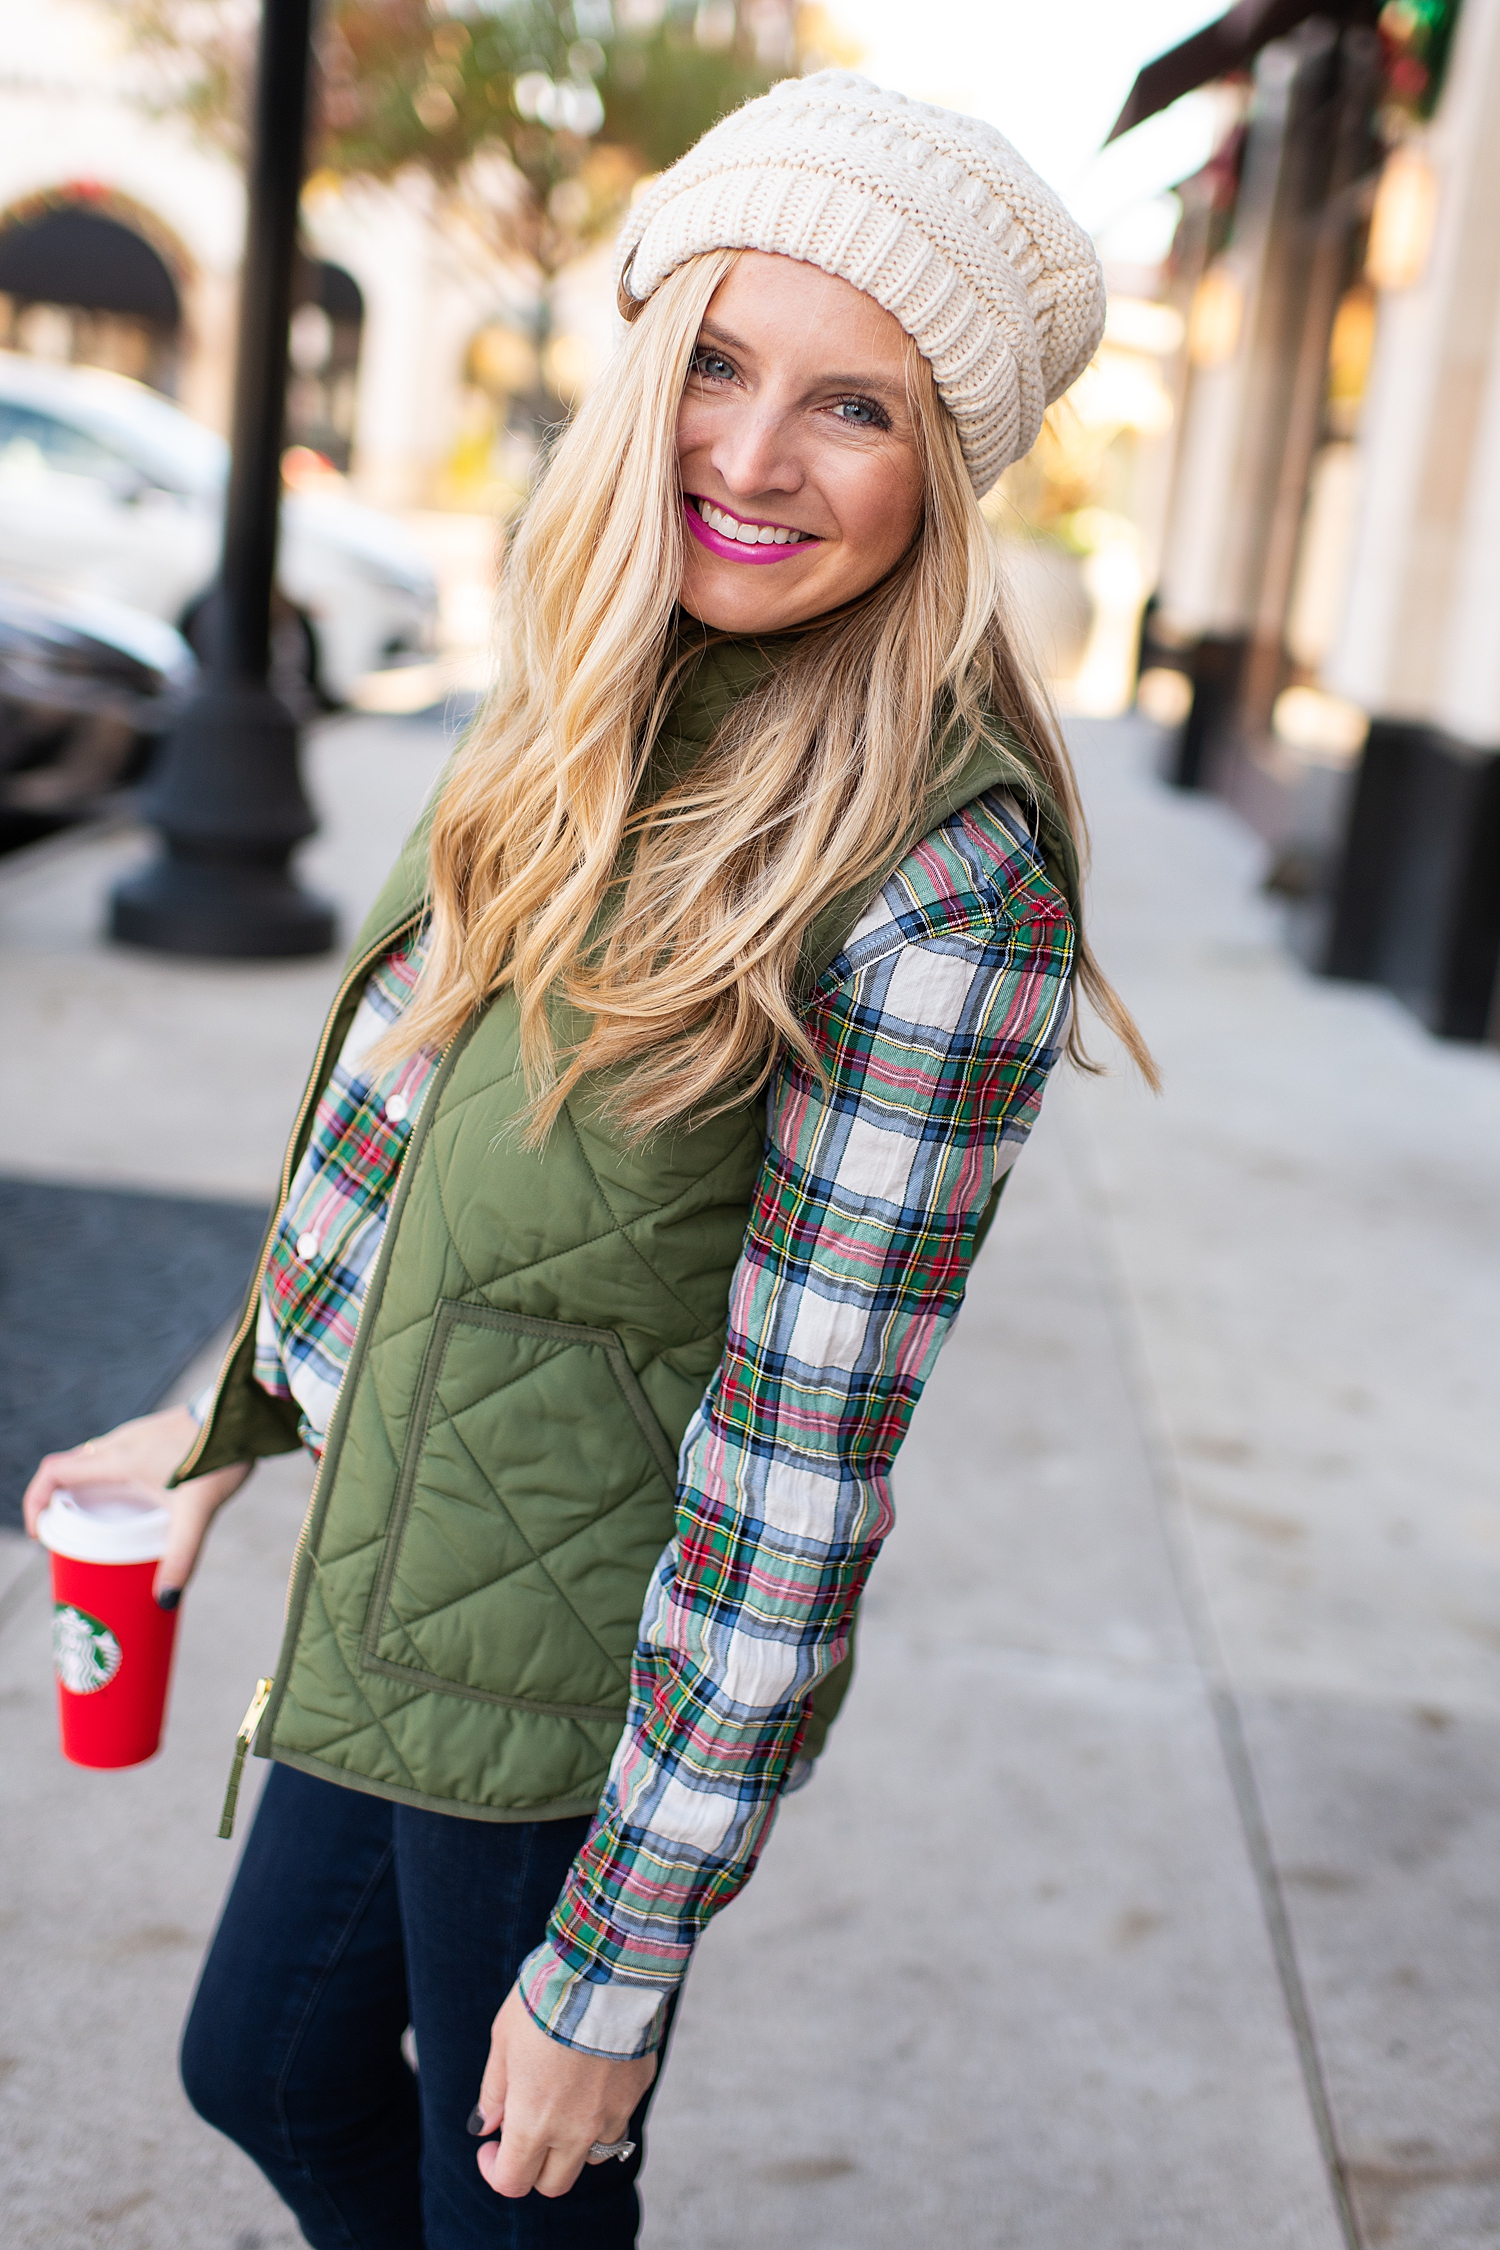 Winter fashion Amazon Favorites featured by top Houston fashion blogger, Fancy Ashley: image of a woman wearing a J.Crew tartan shirt, J.Crew puffer vest, Nordstrom high waist ankle jeans, pom pom beanie and Sole Society bootie